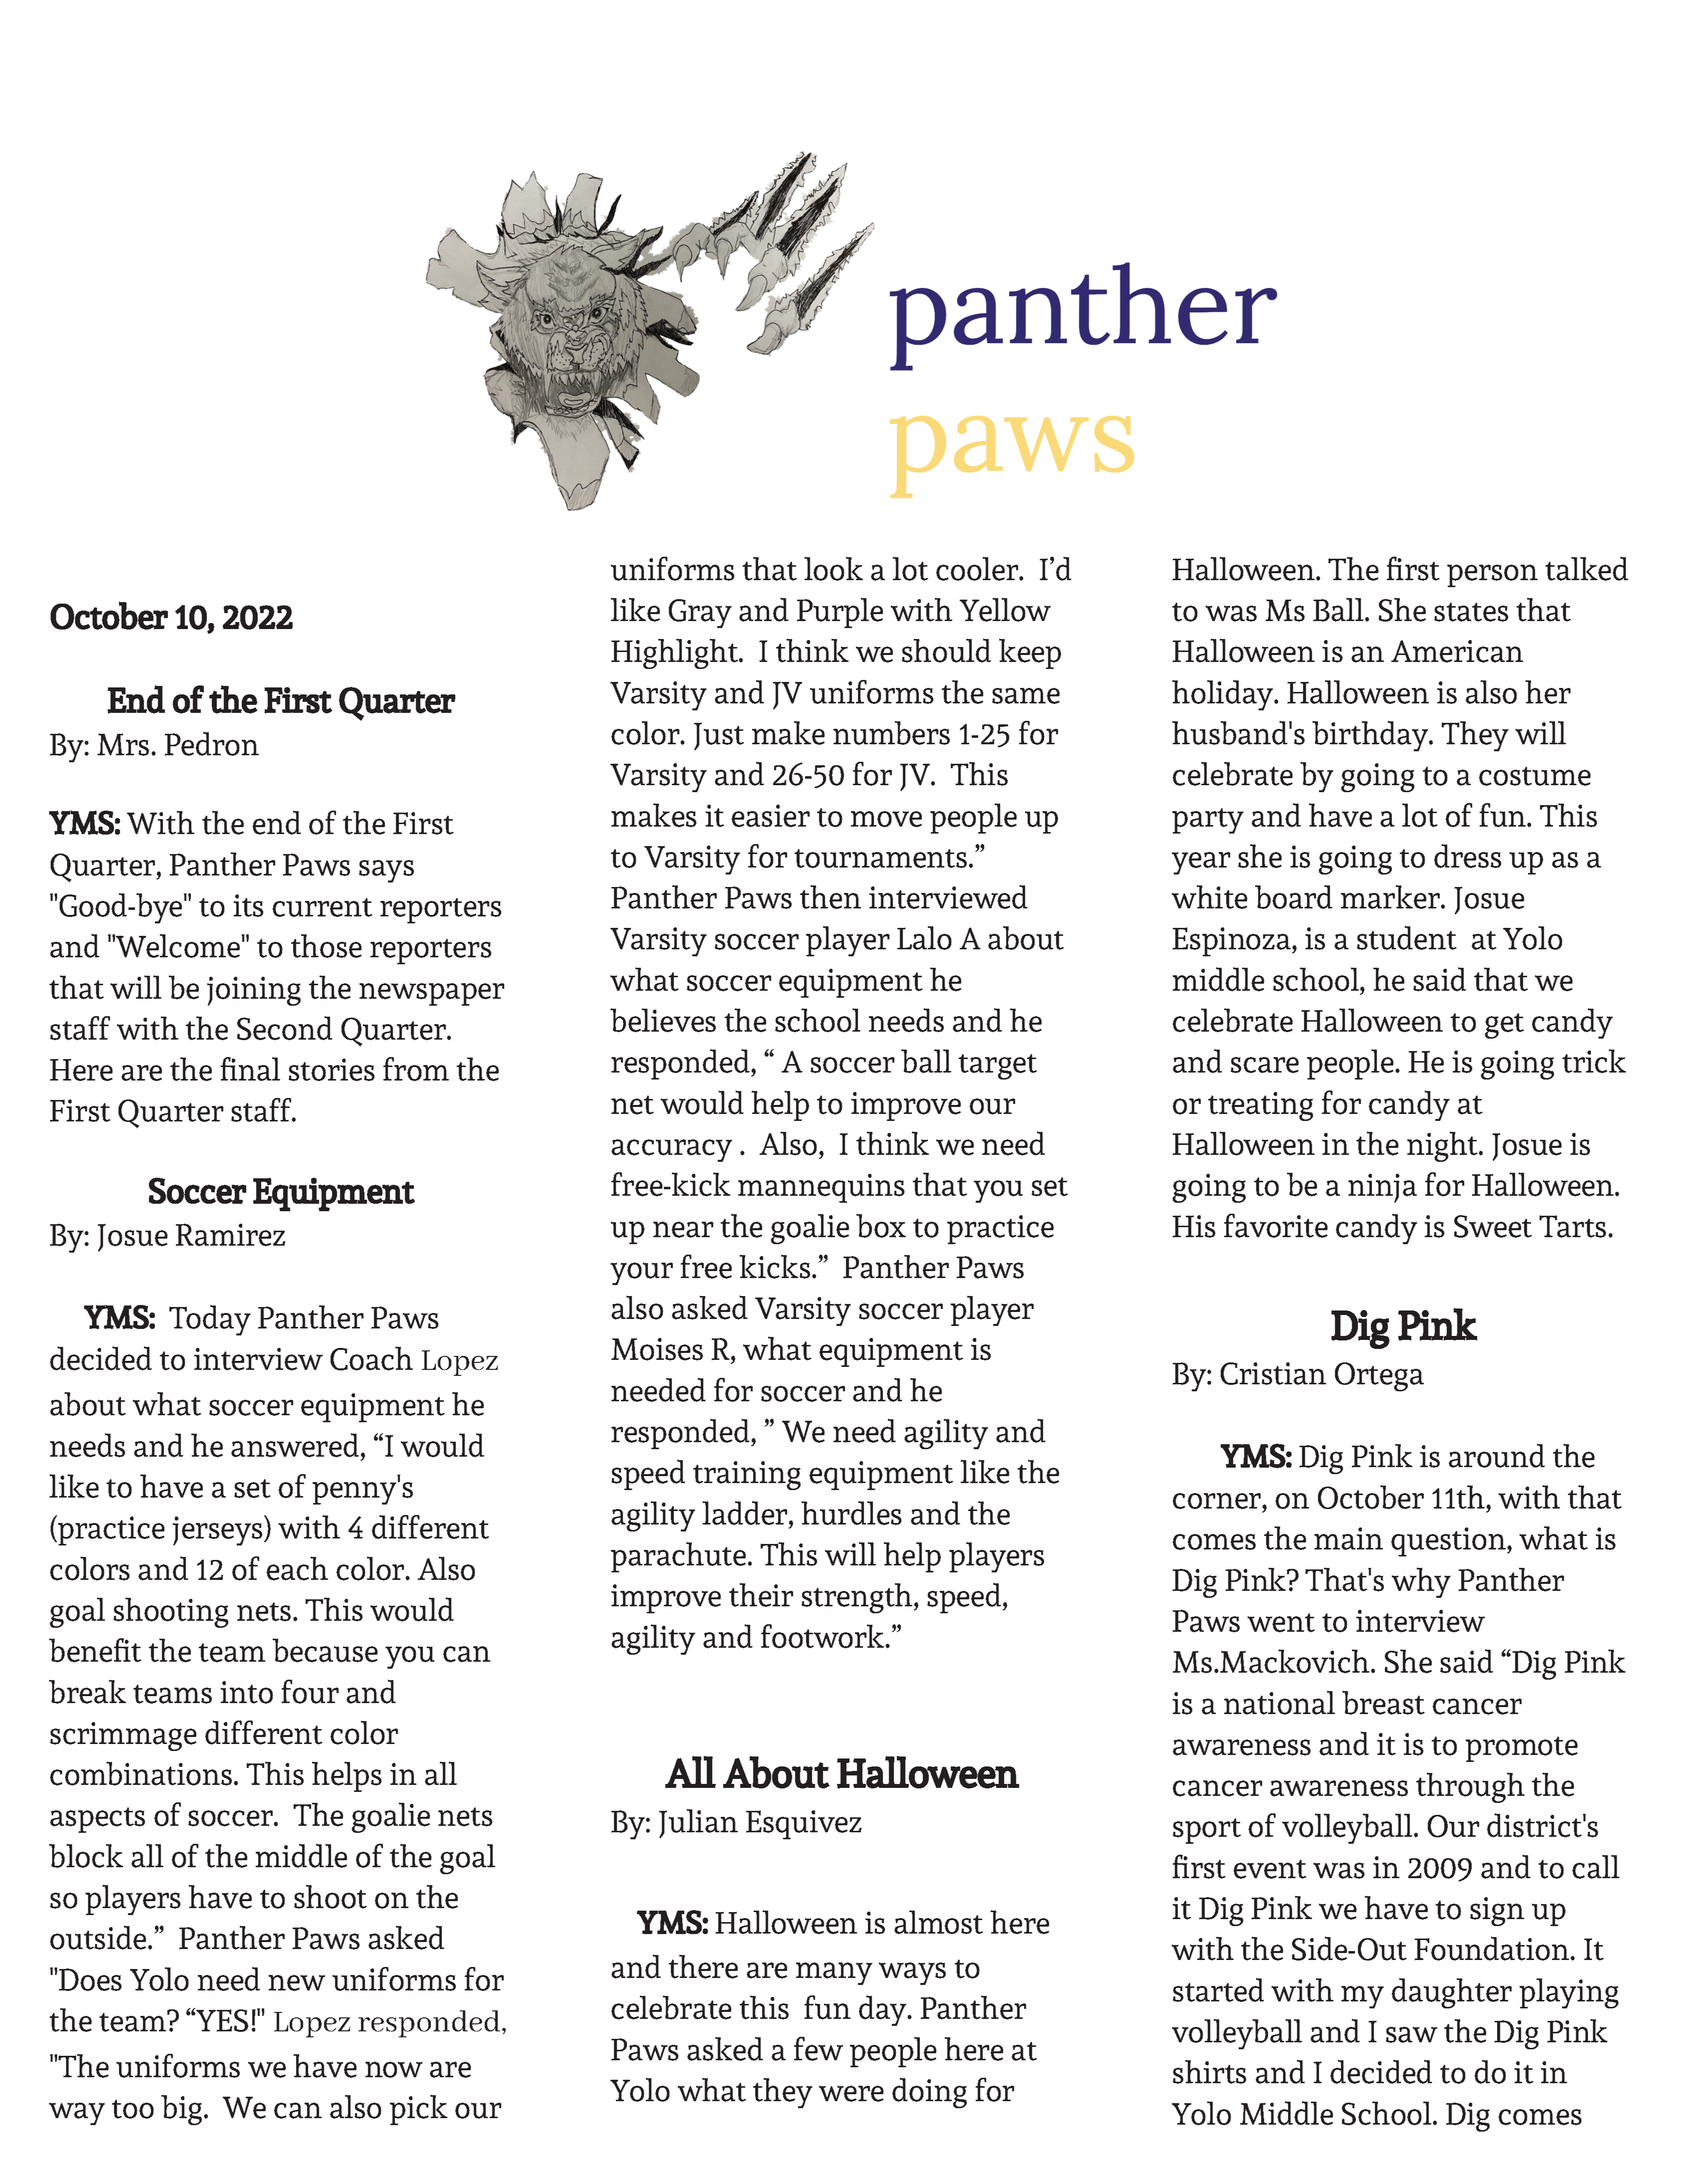 Link to October 2022 Issue off Panther Paws